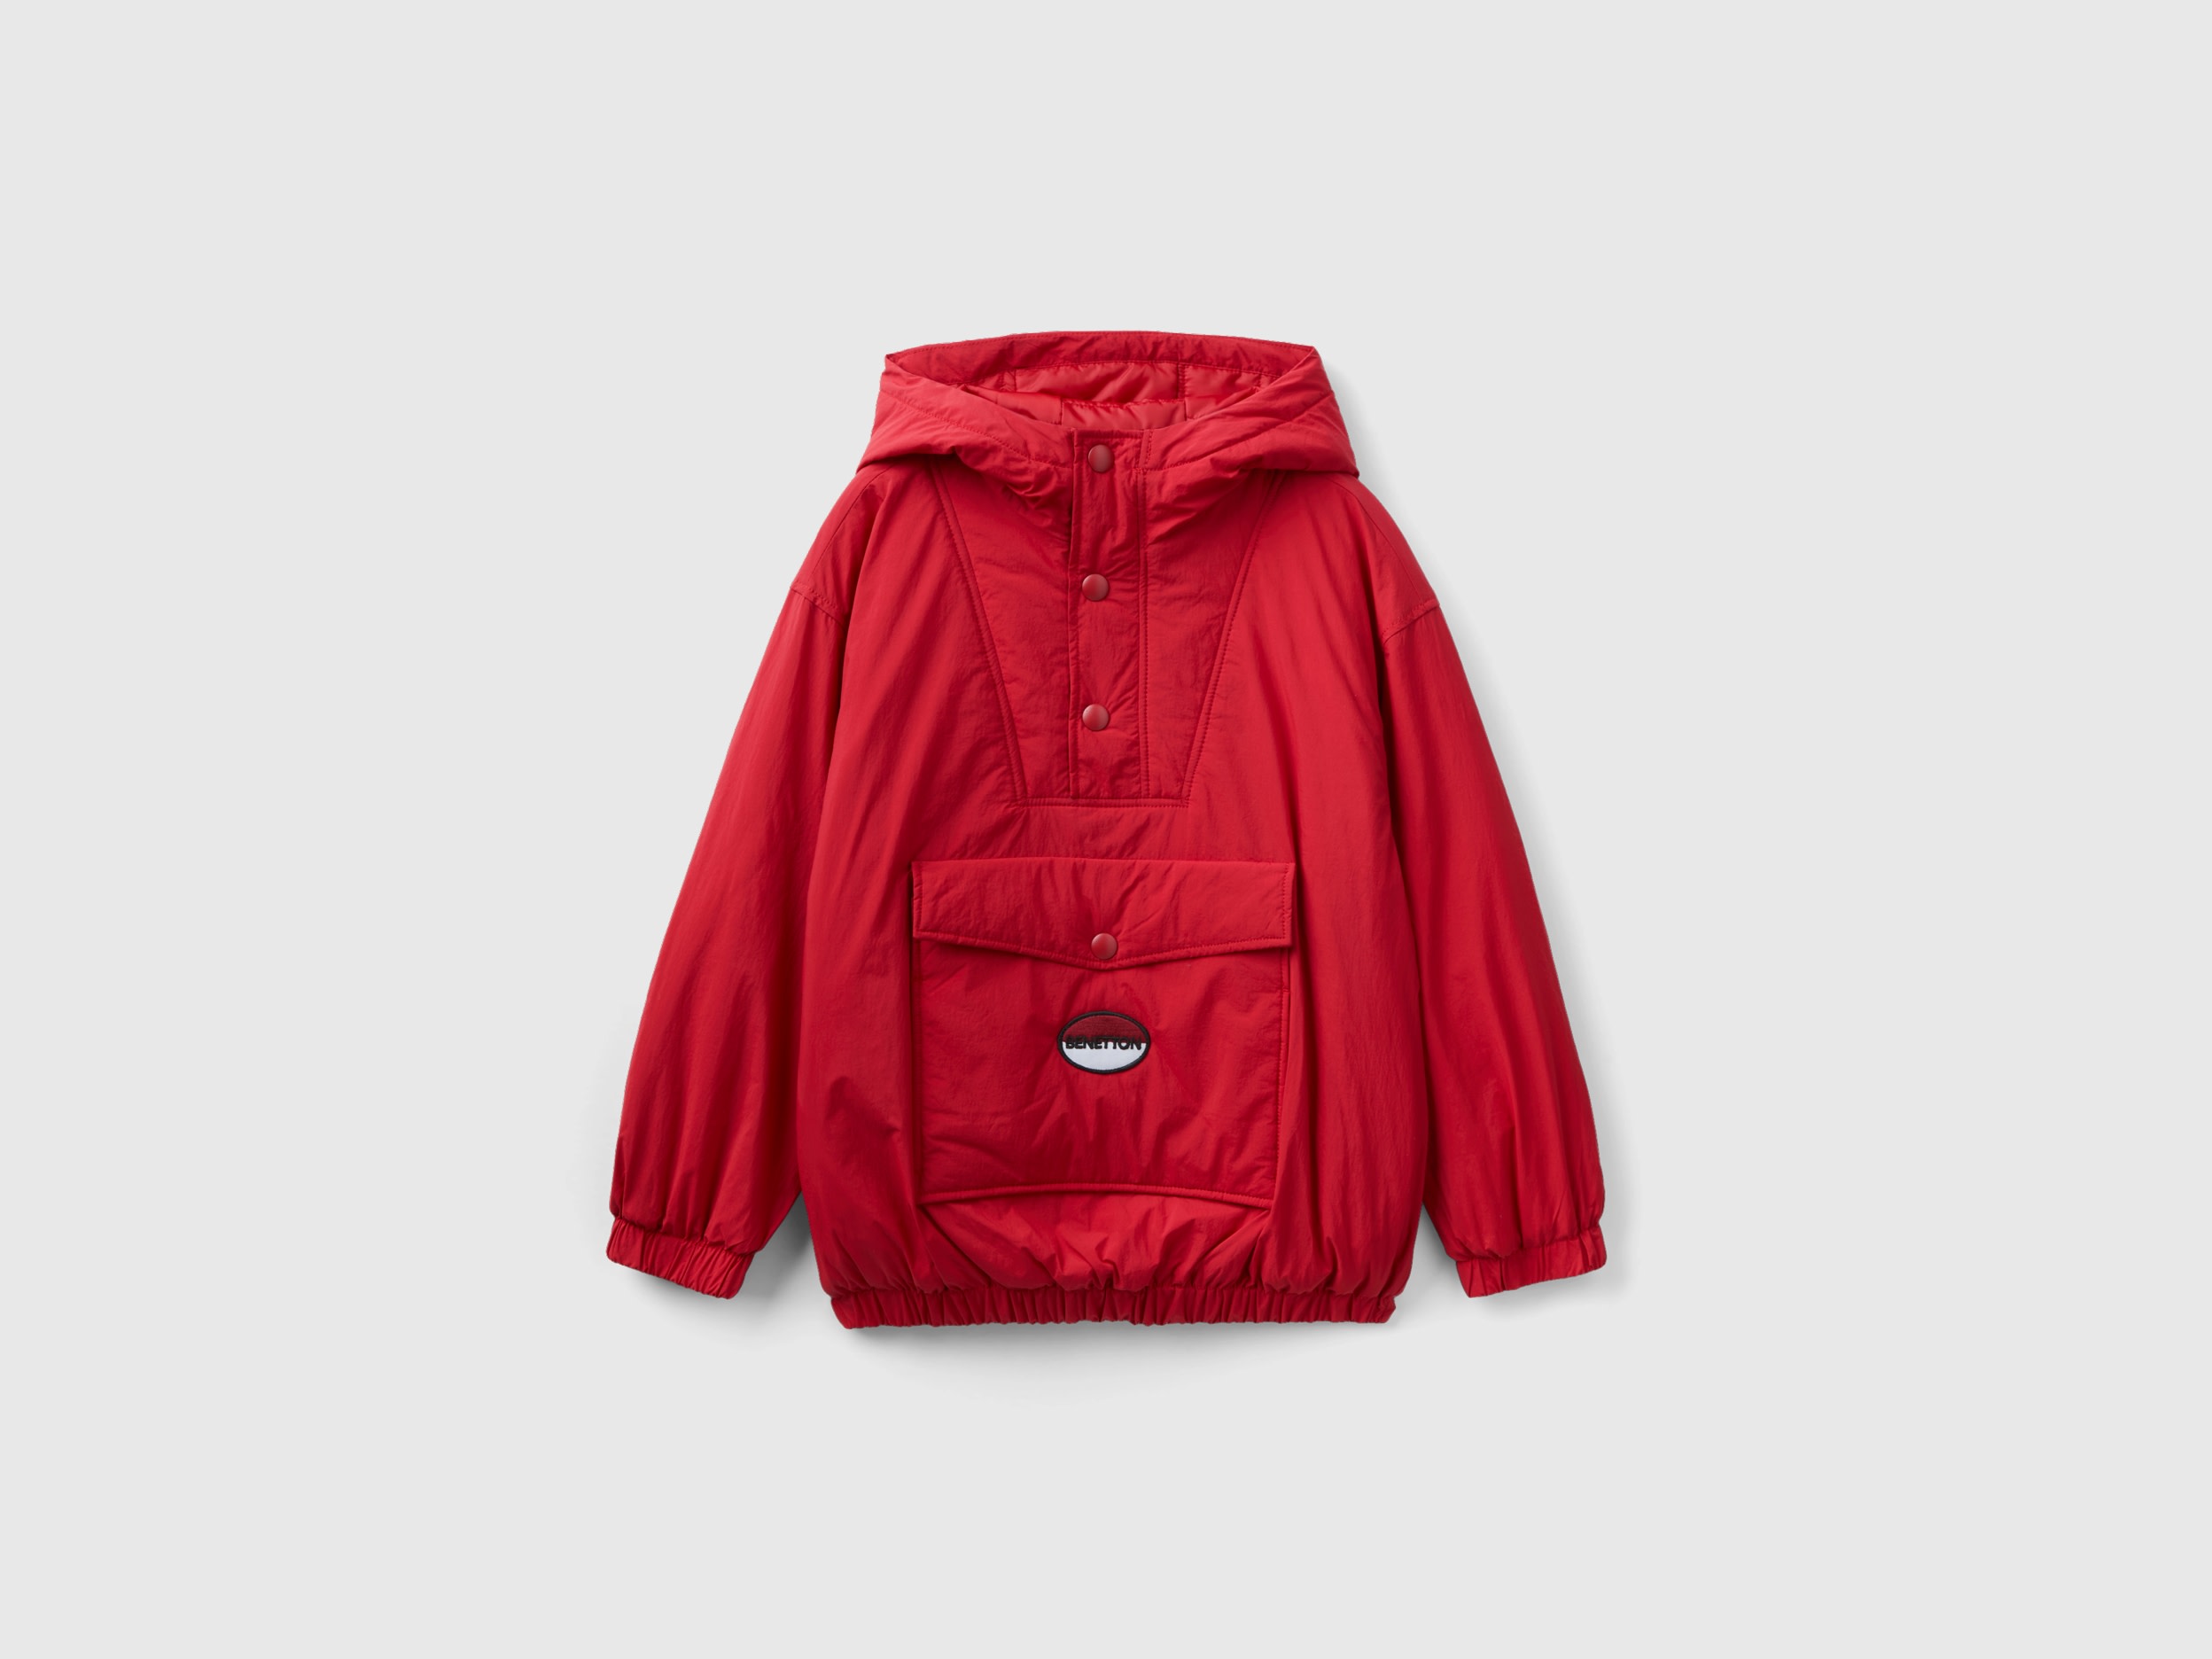 Benetton, Red Jacket With Pocket, size S, Red, Kids